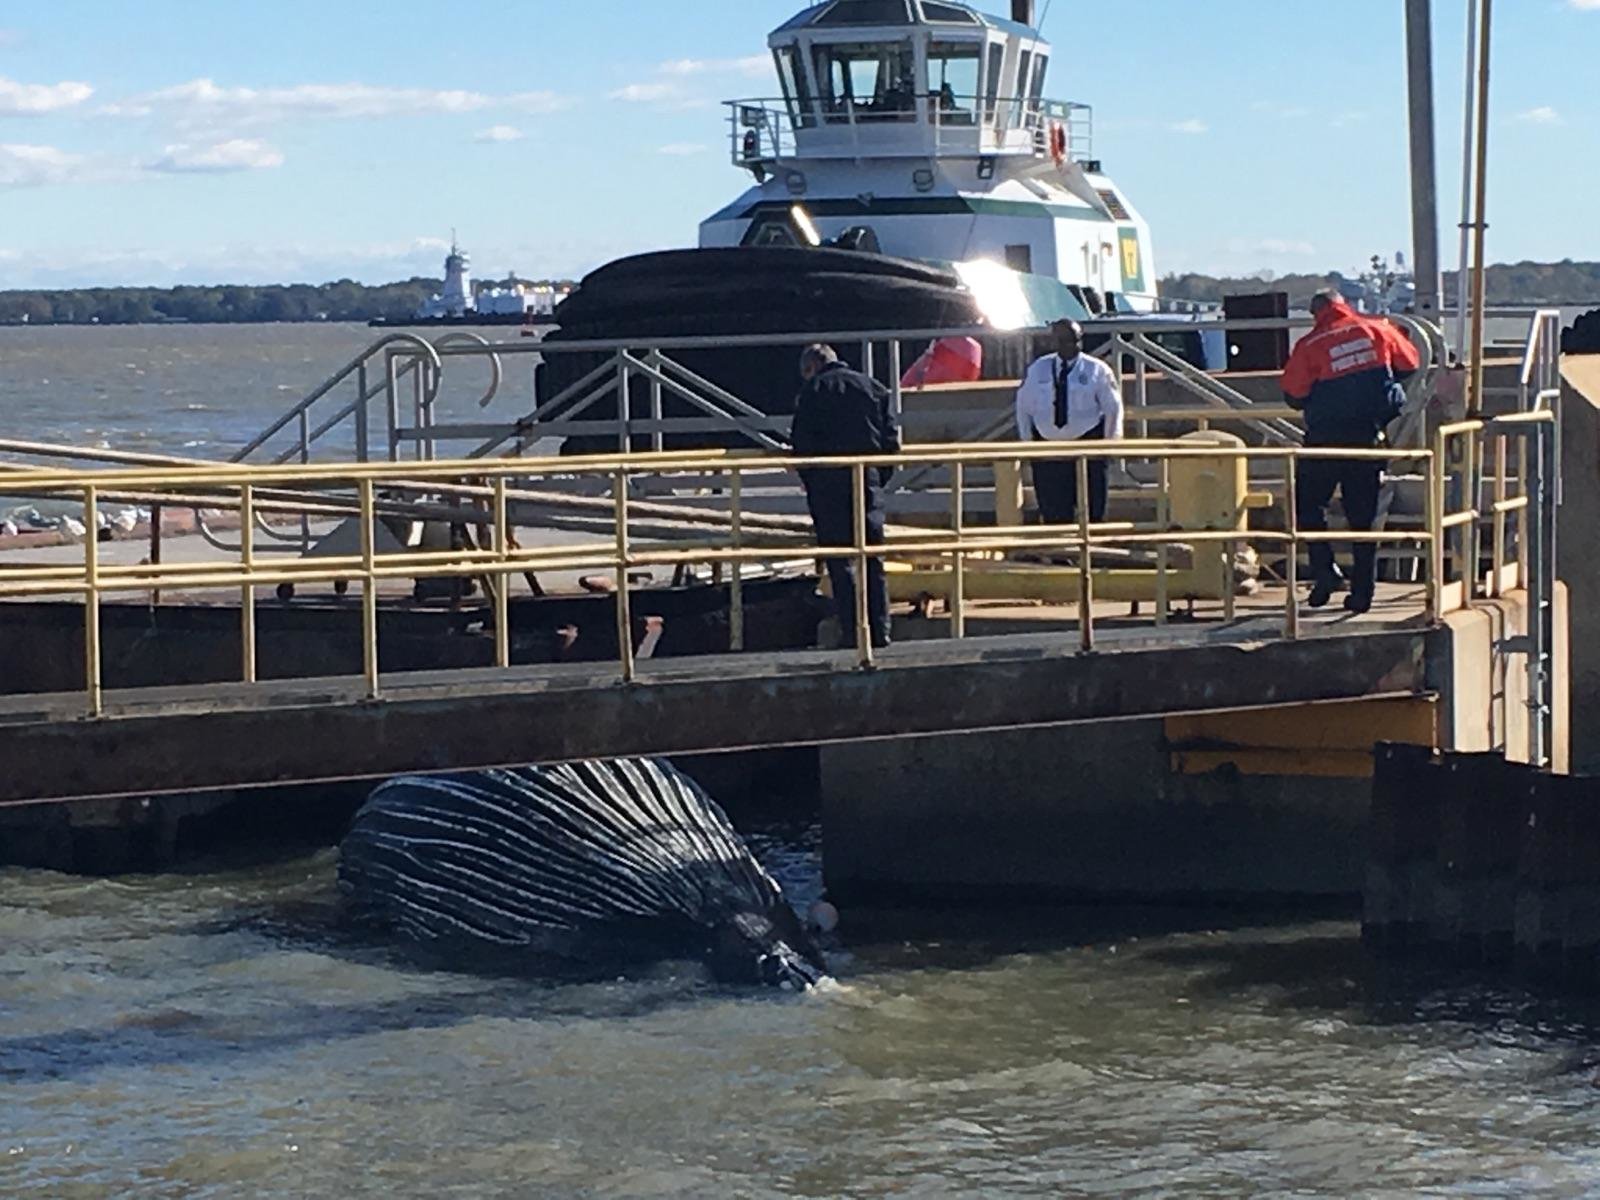 The dead whale caught in the Port of Wilmington